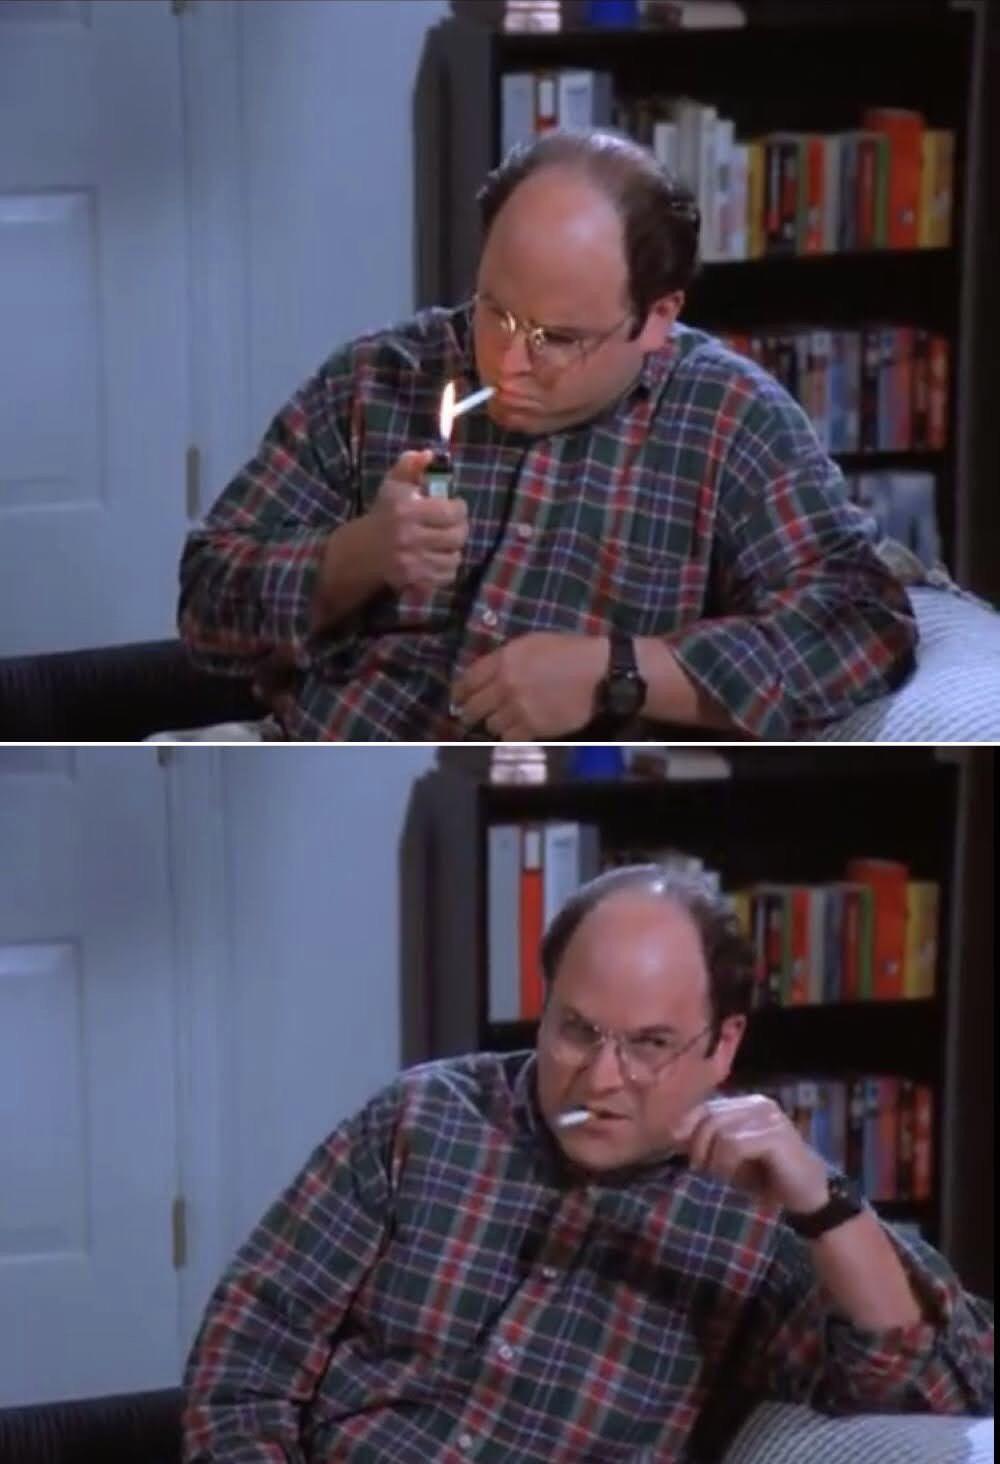 Image tagged in buck showalter,george costanza,britton - Imgflip